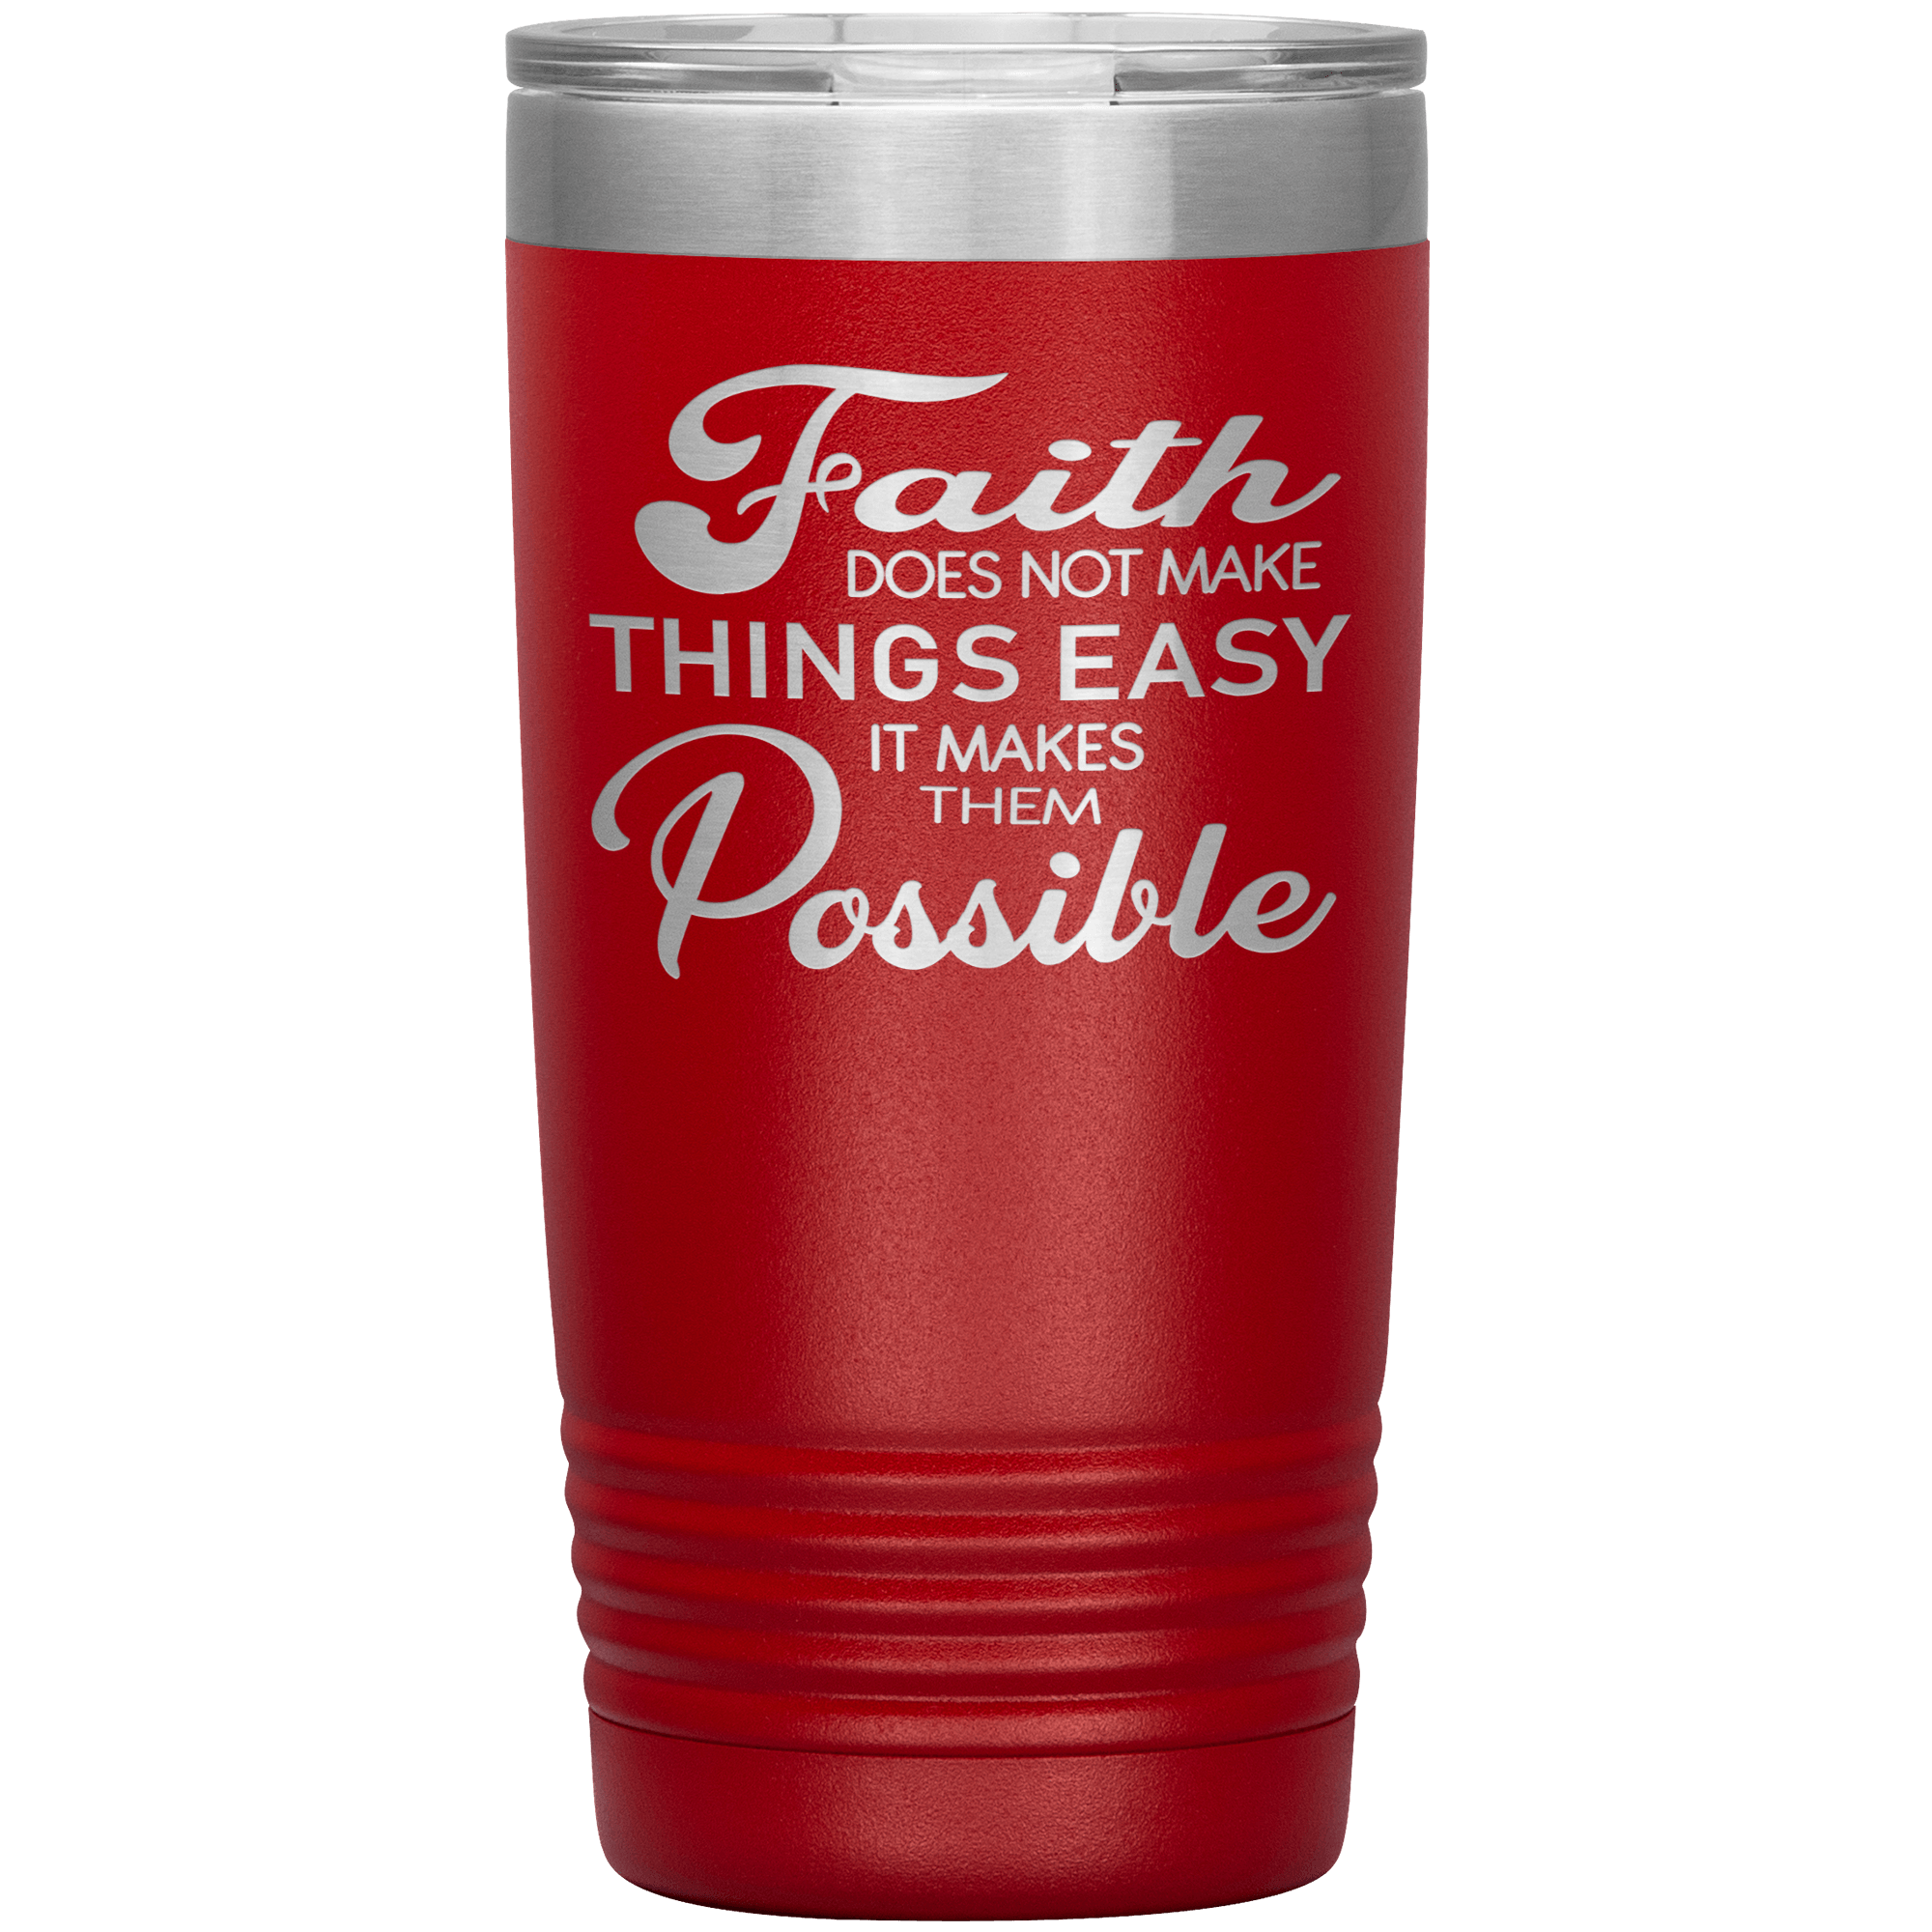 "Faith Does Not Make Things Easy It Makes Them Possible"